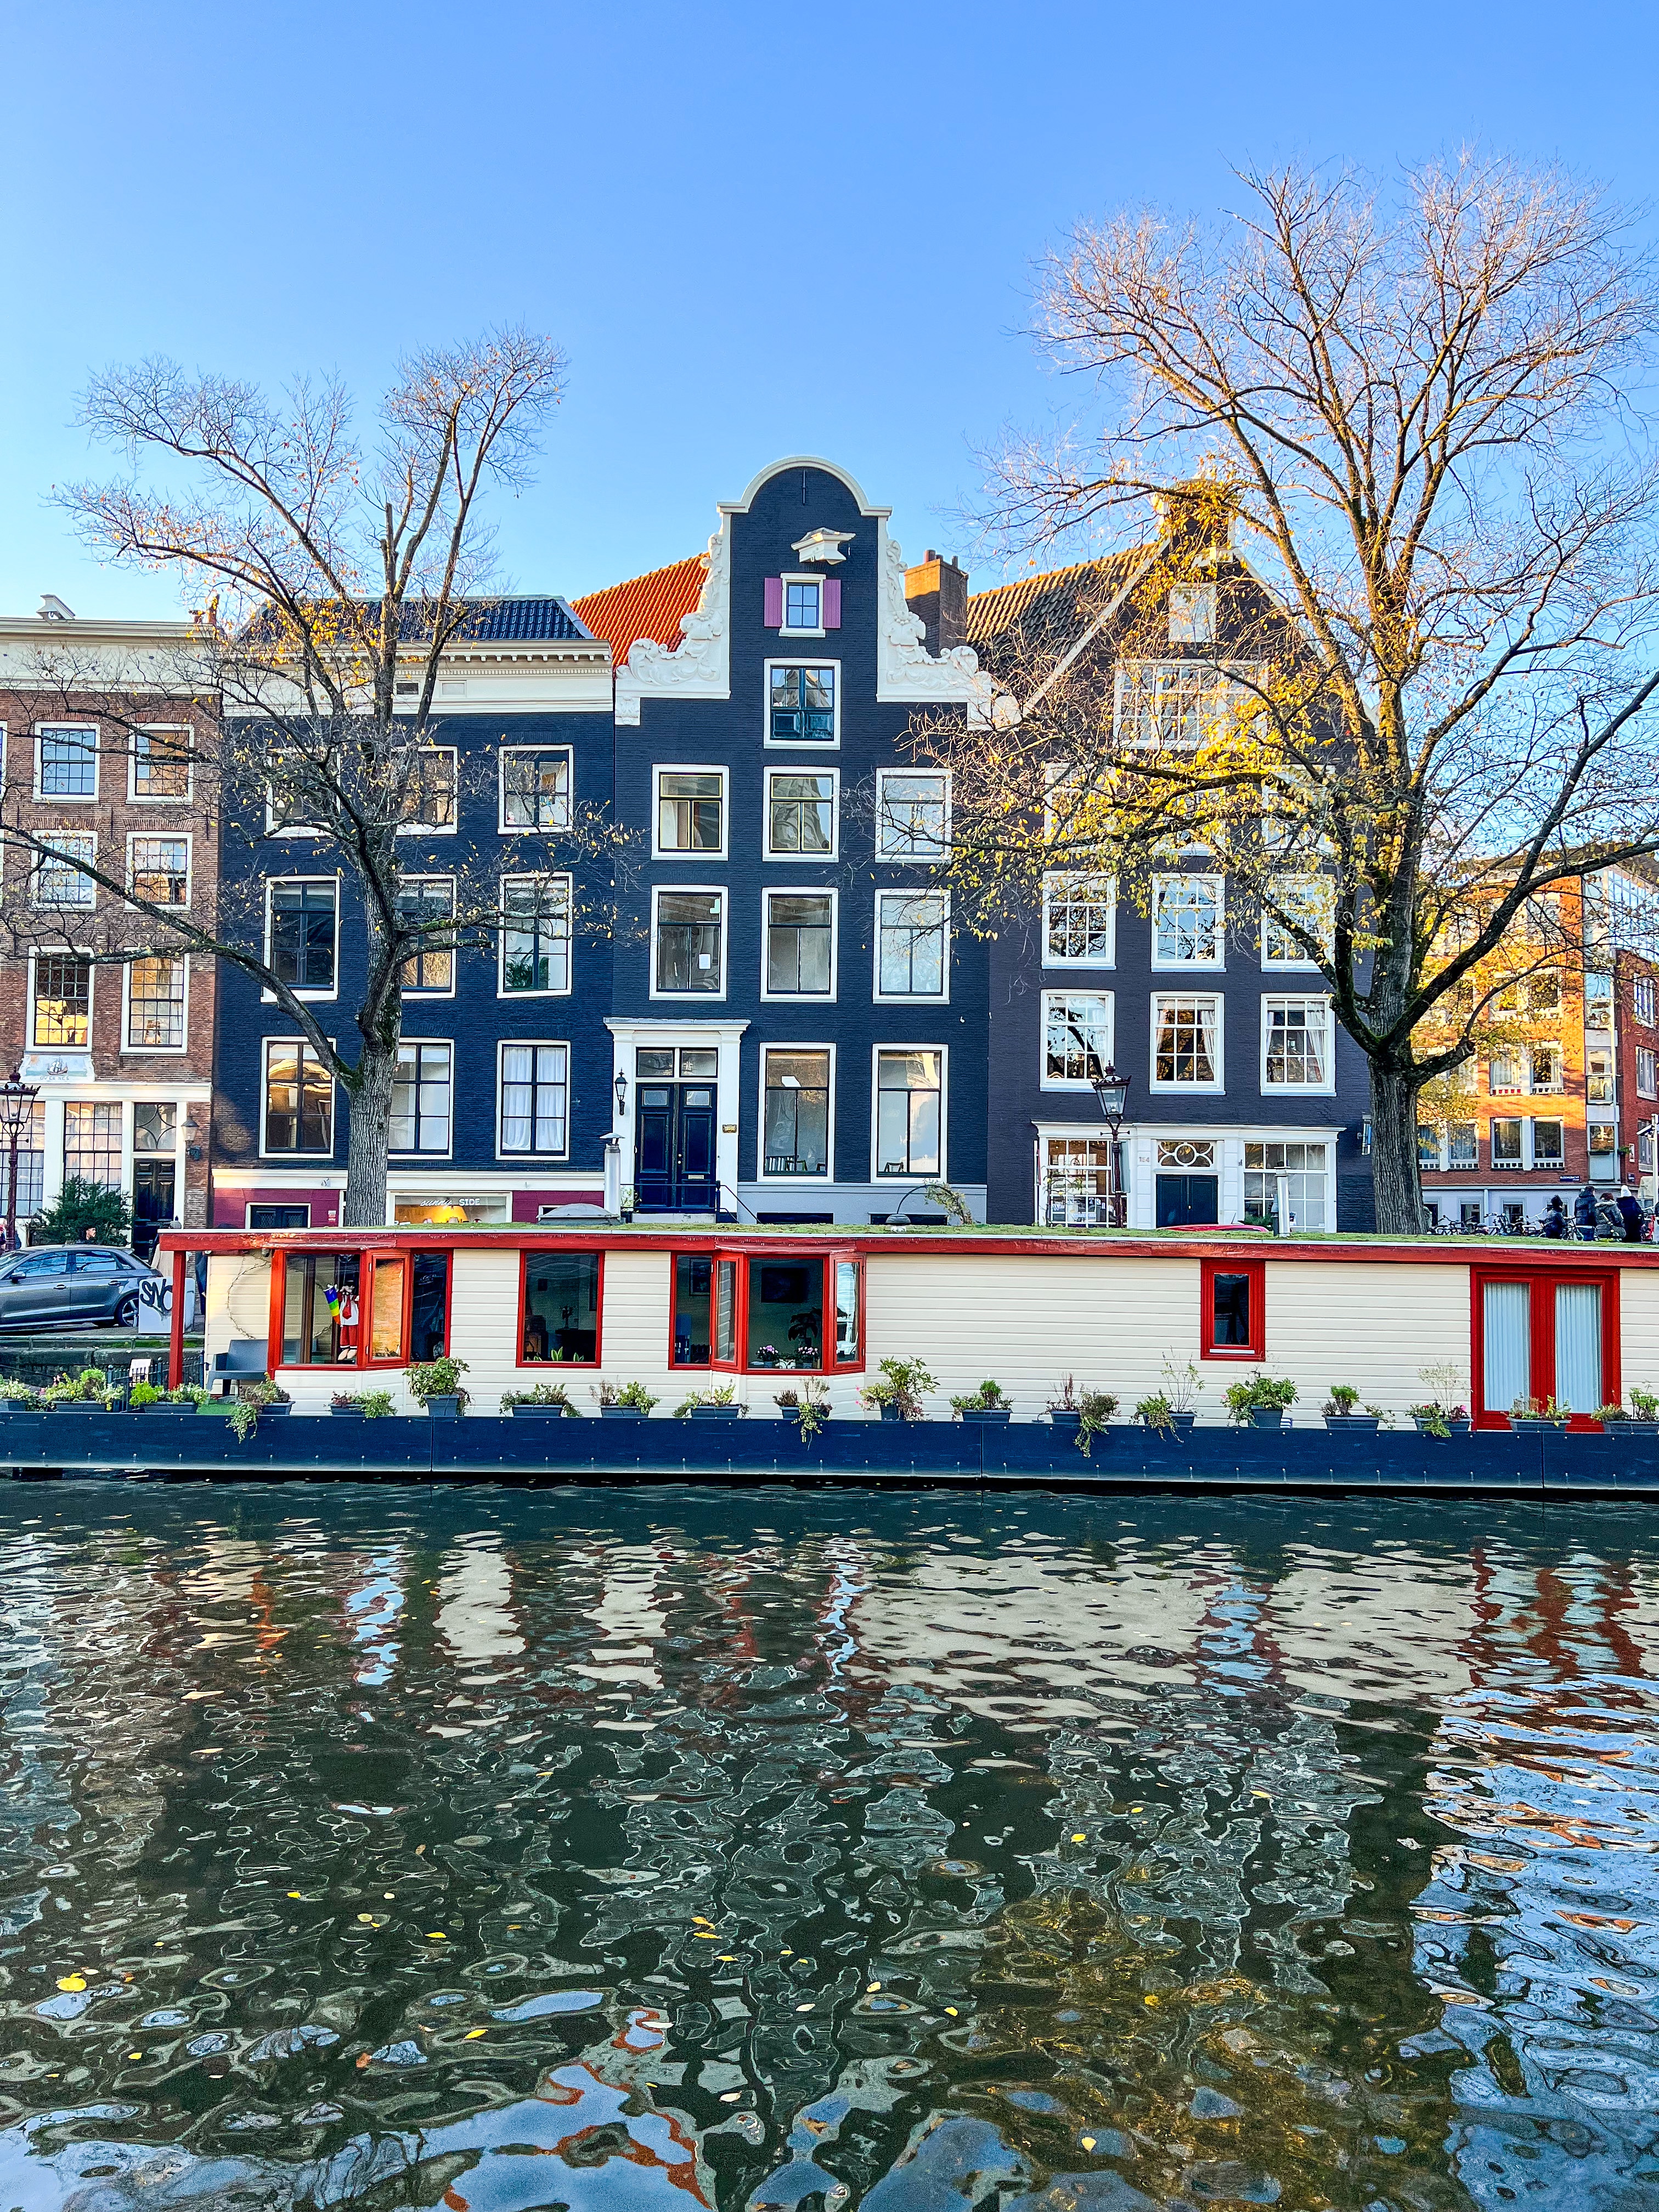 22 Reasons to Move to The Netherlands